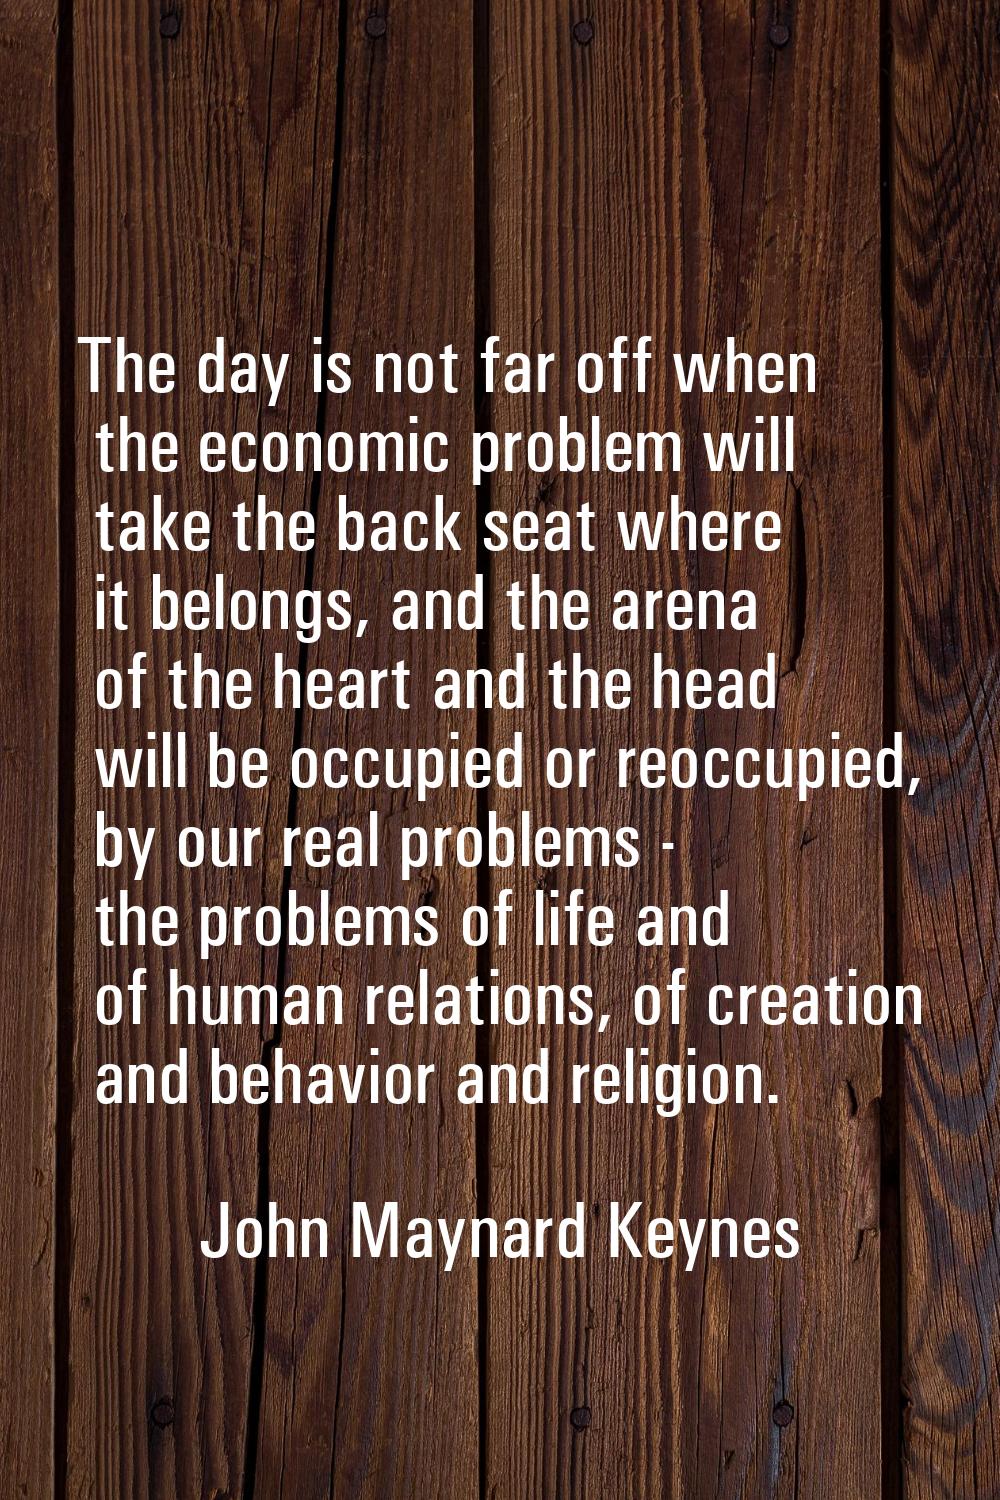 The day is not far off when the economic problem will take the back seat where it belongs, and the 